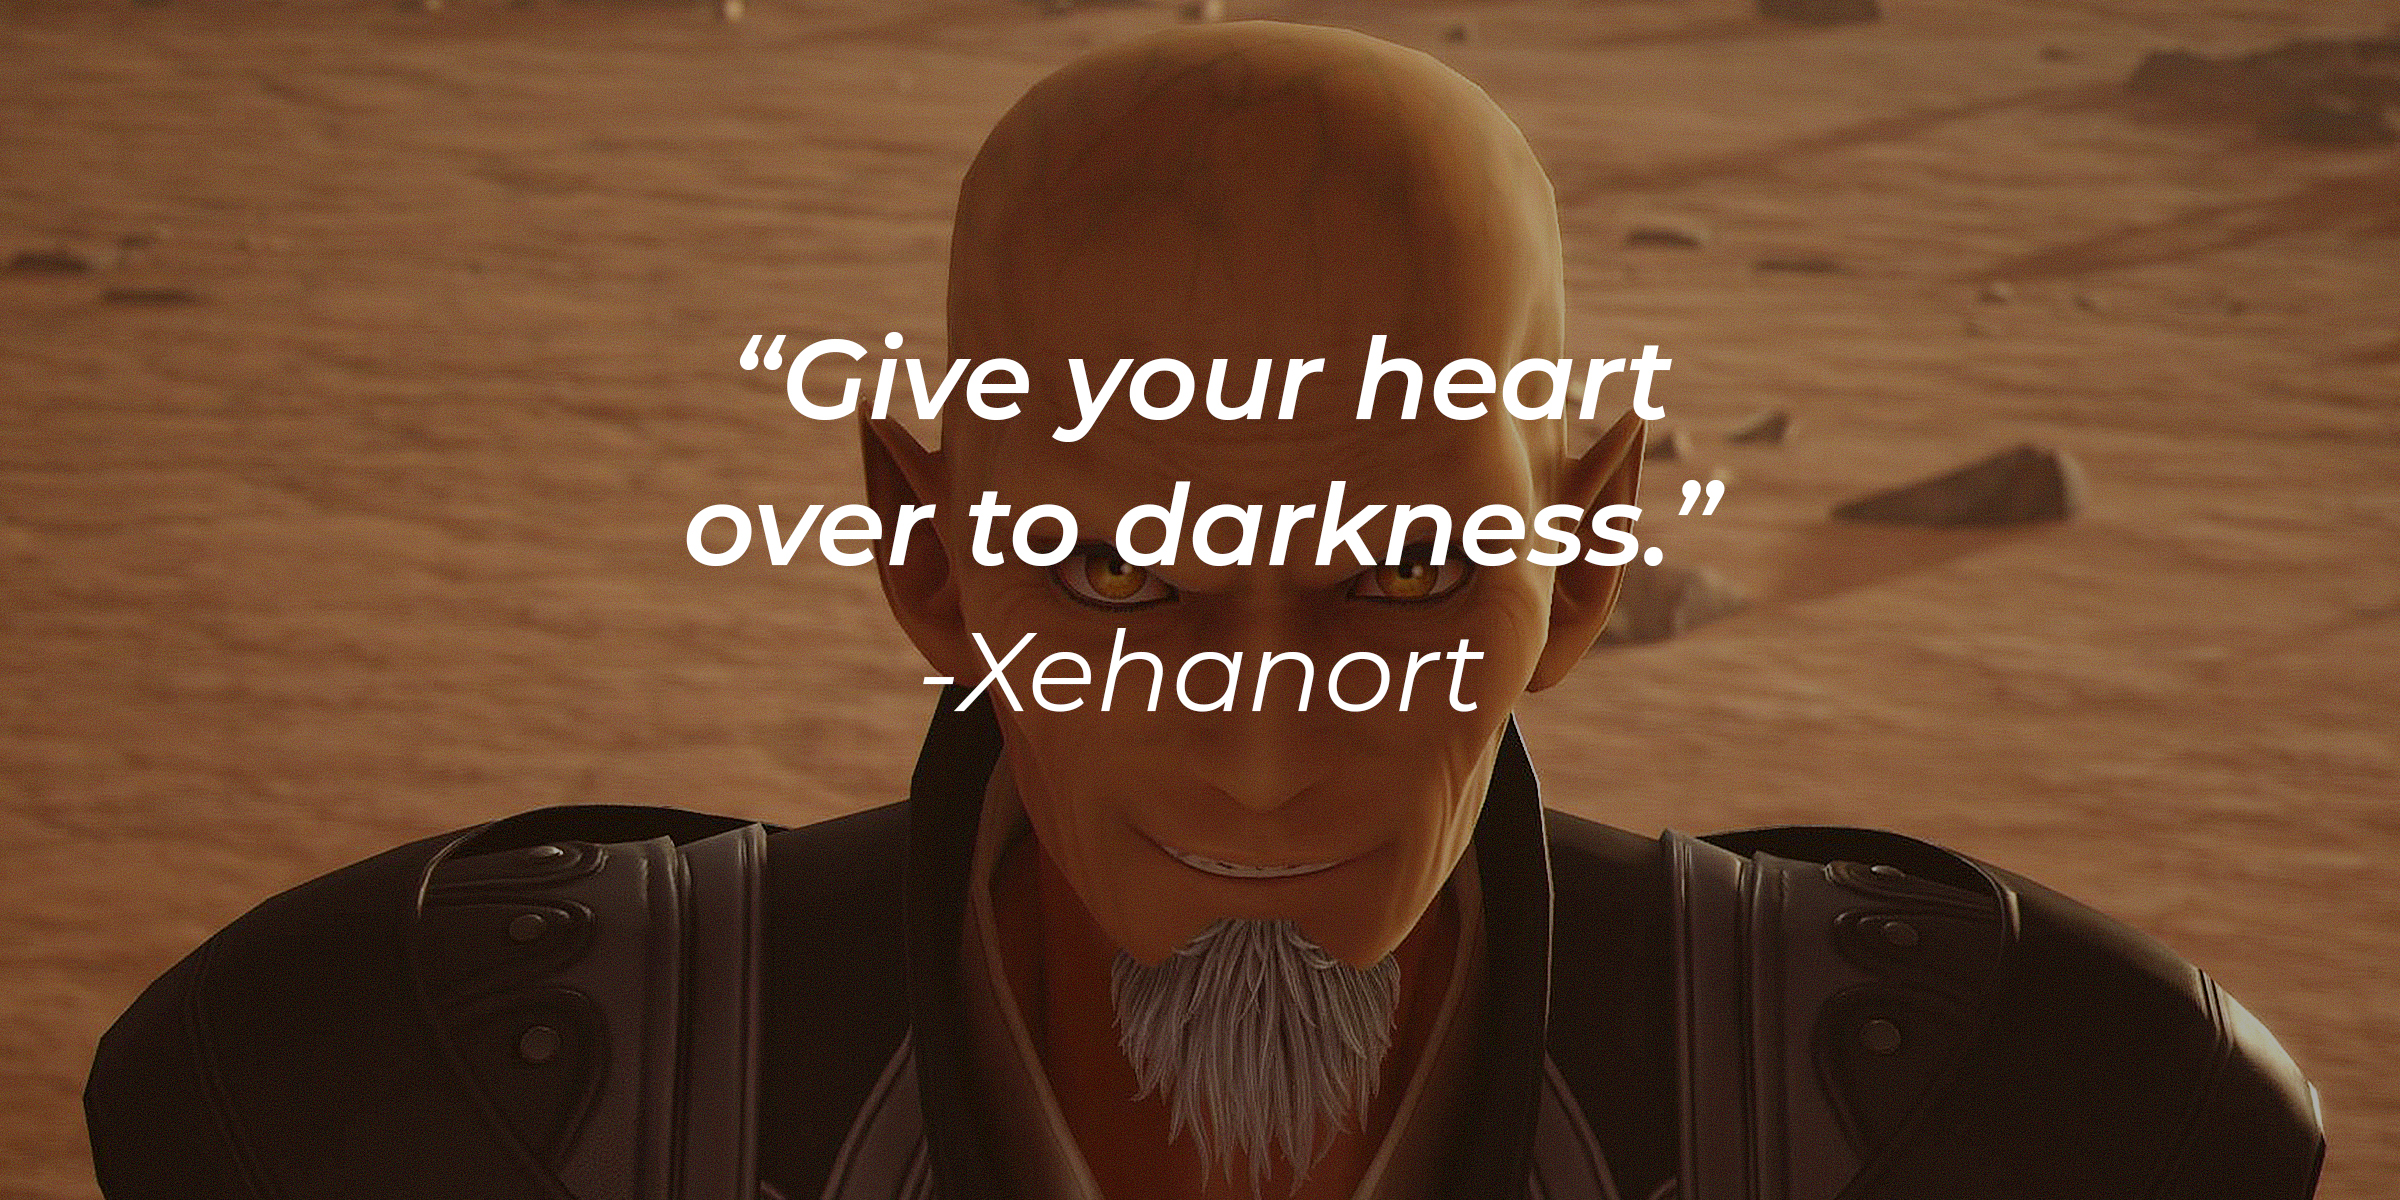 An image of Xehanort with his quote: "Give your heart over to darkness.” | Source: facebook.com/KingdomHearts